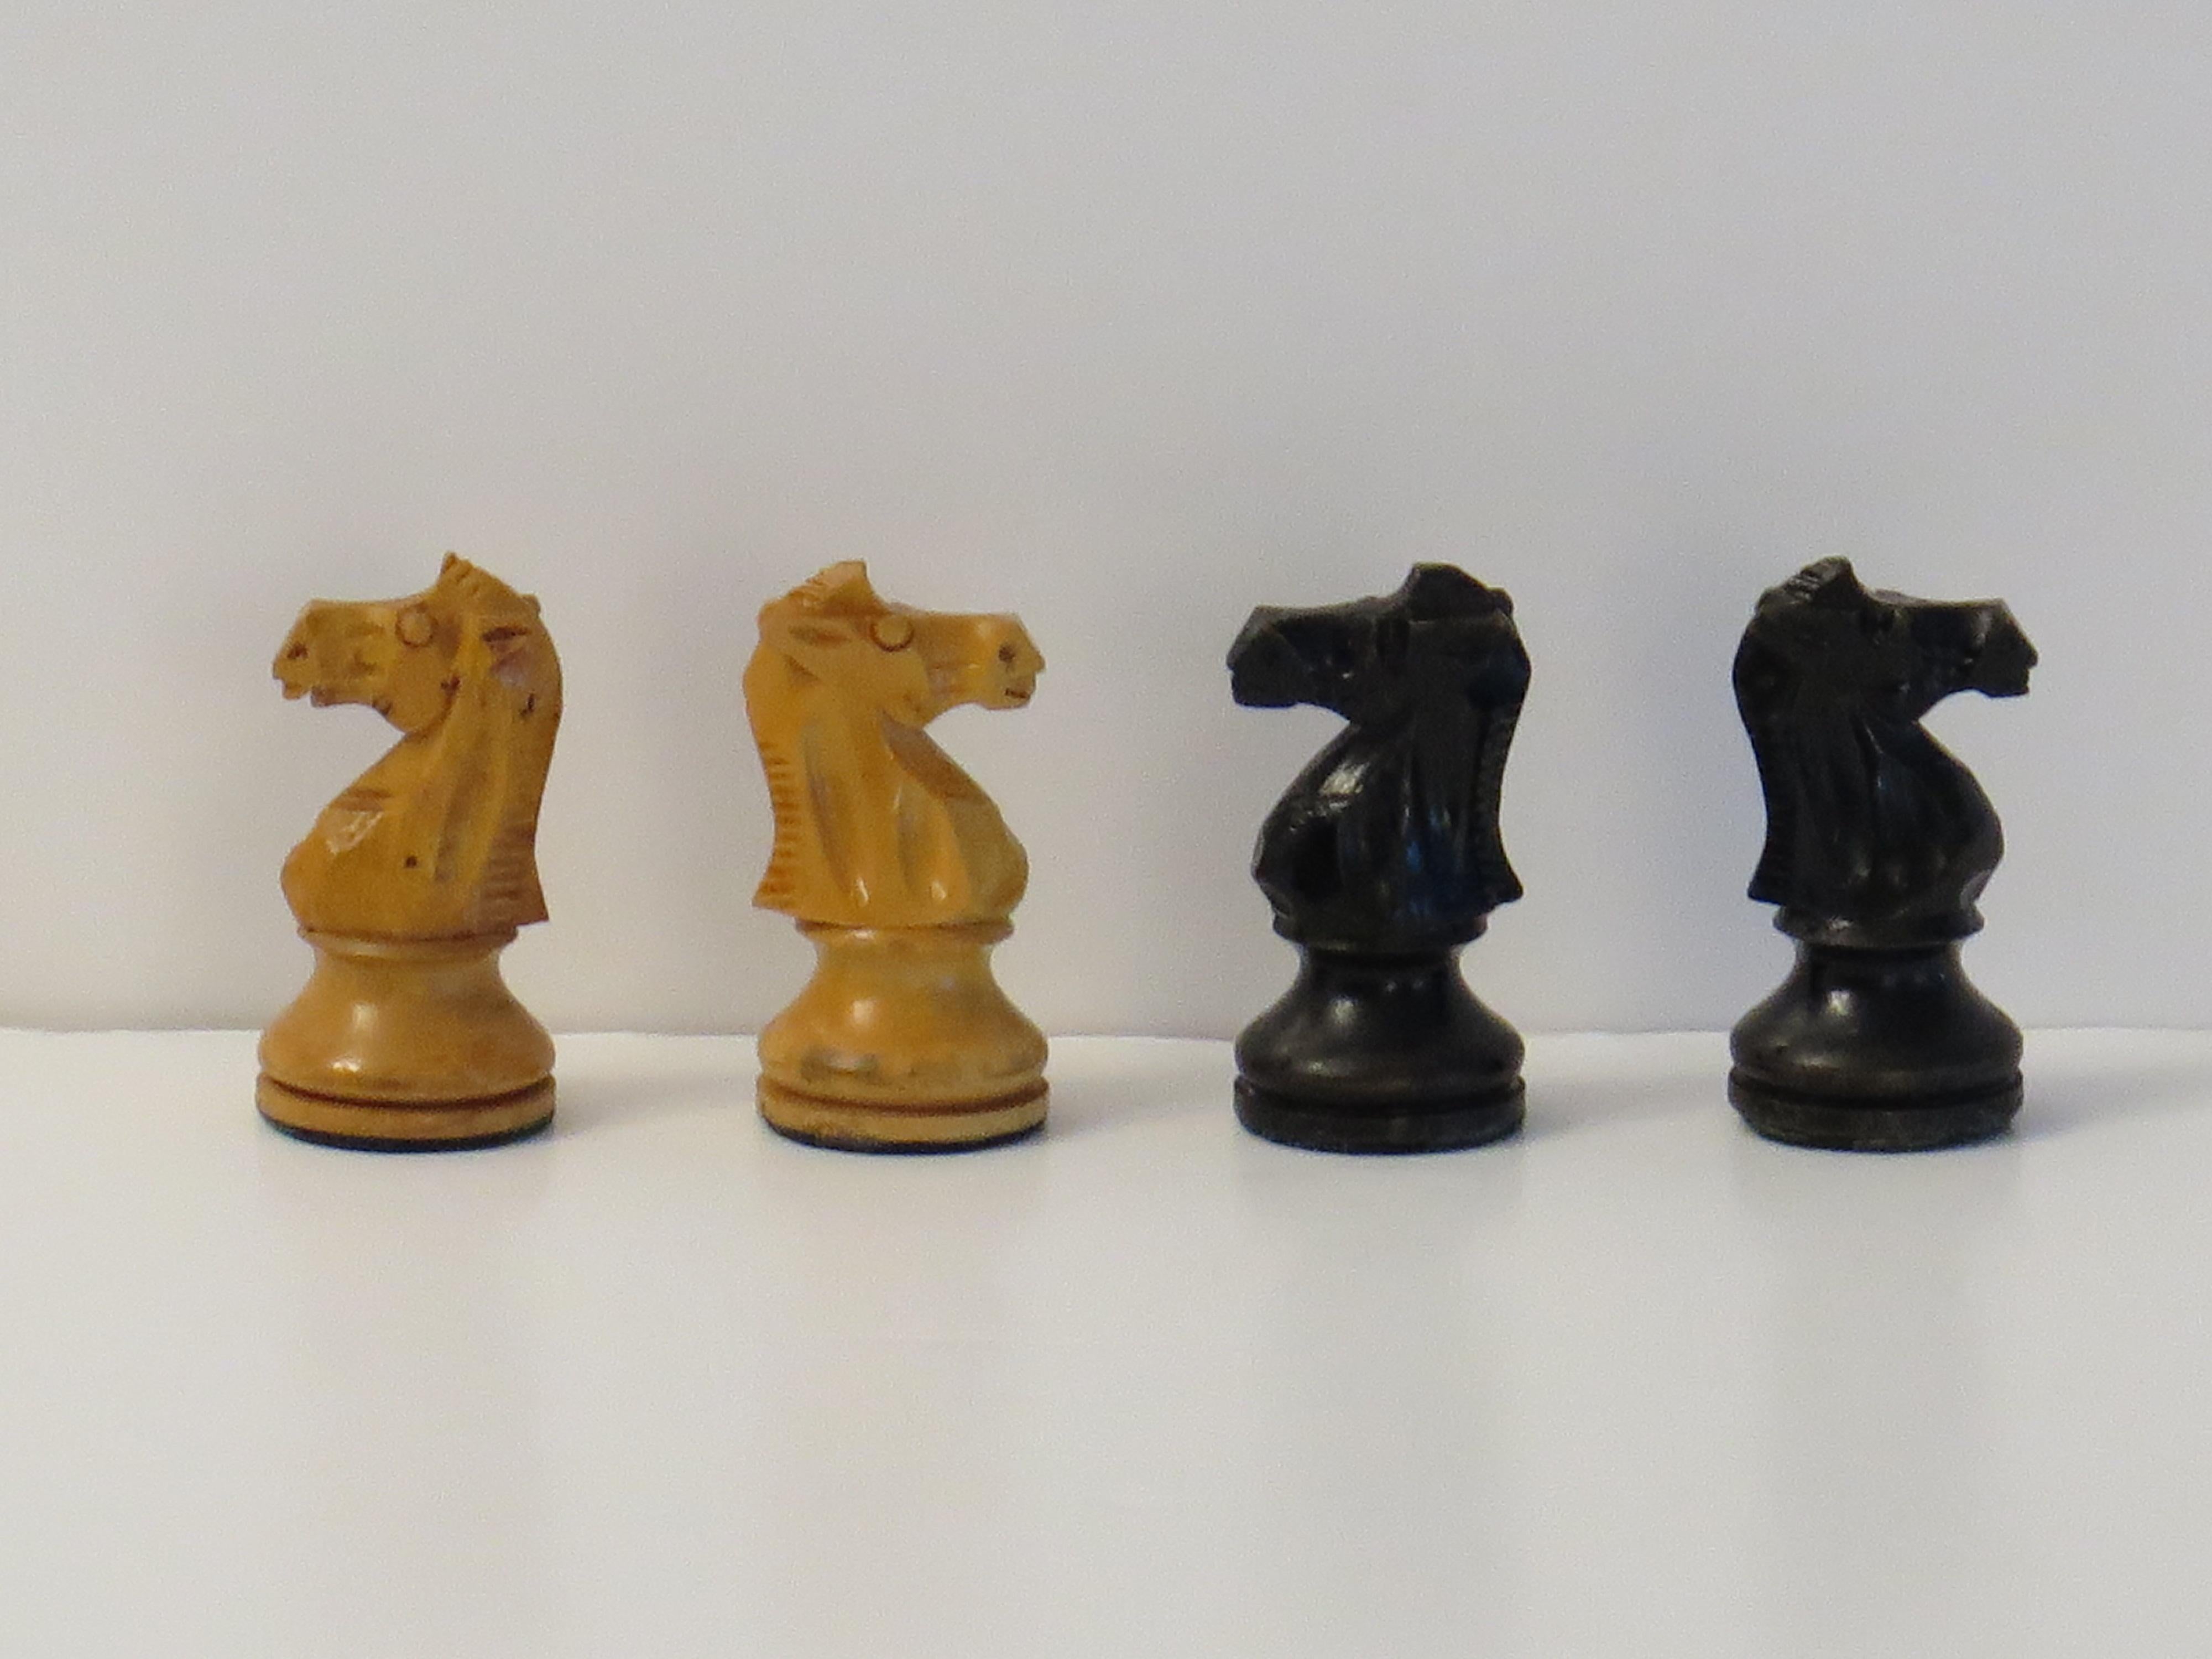 Staunton Fierce Knight Weighted Club Chess Set 8.5cm Kings Jointed Box, 19th C For Sale 3